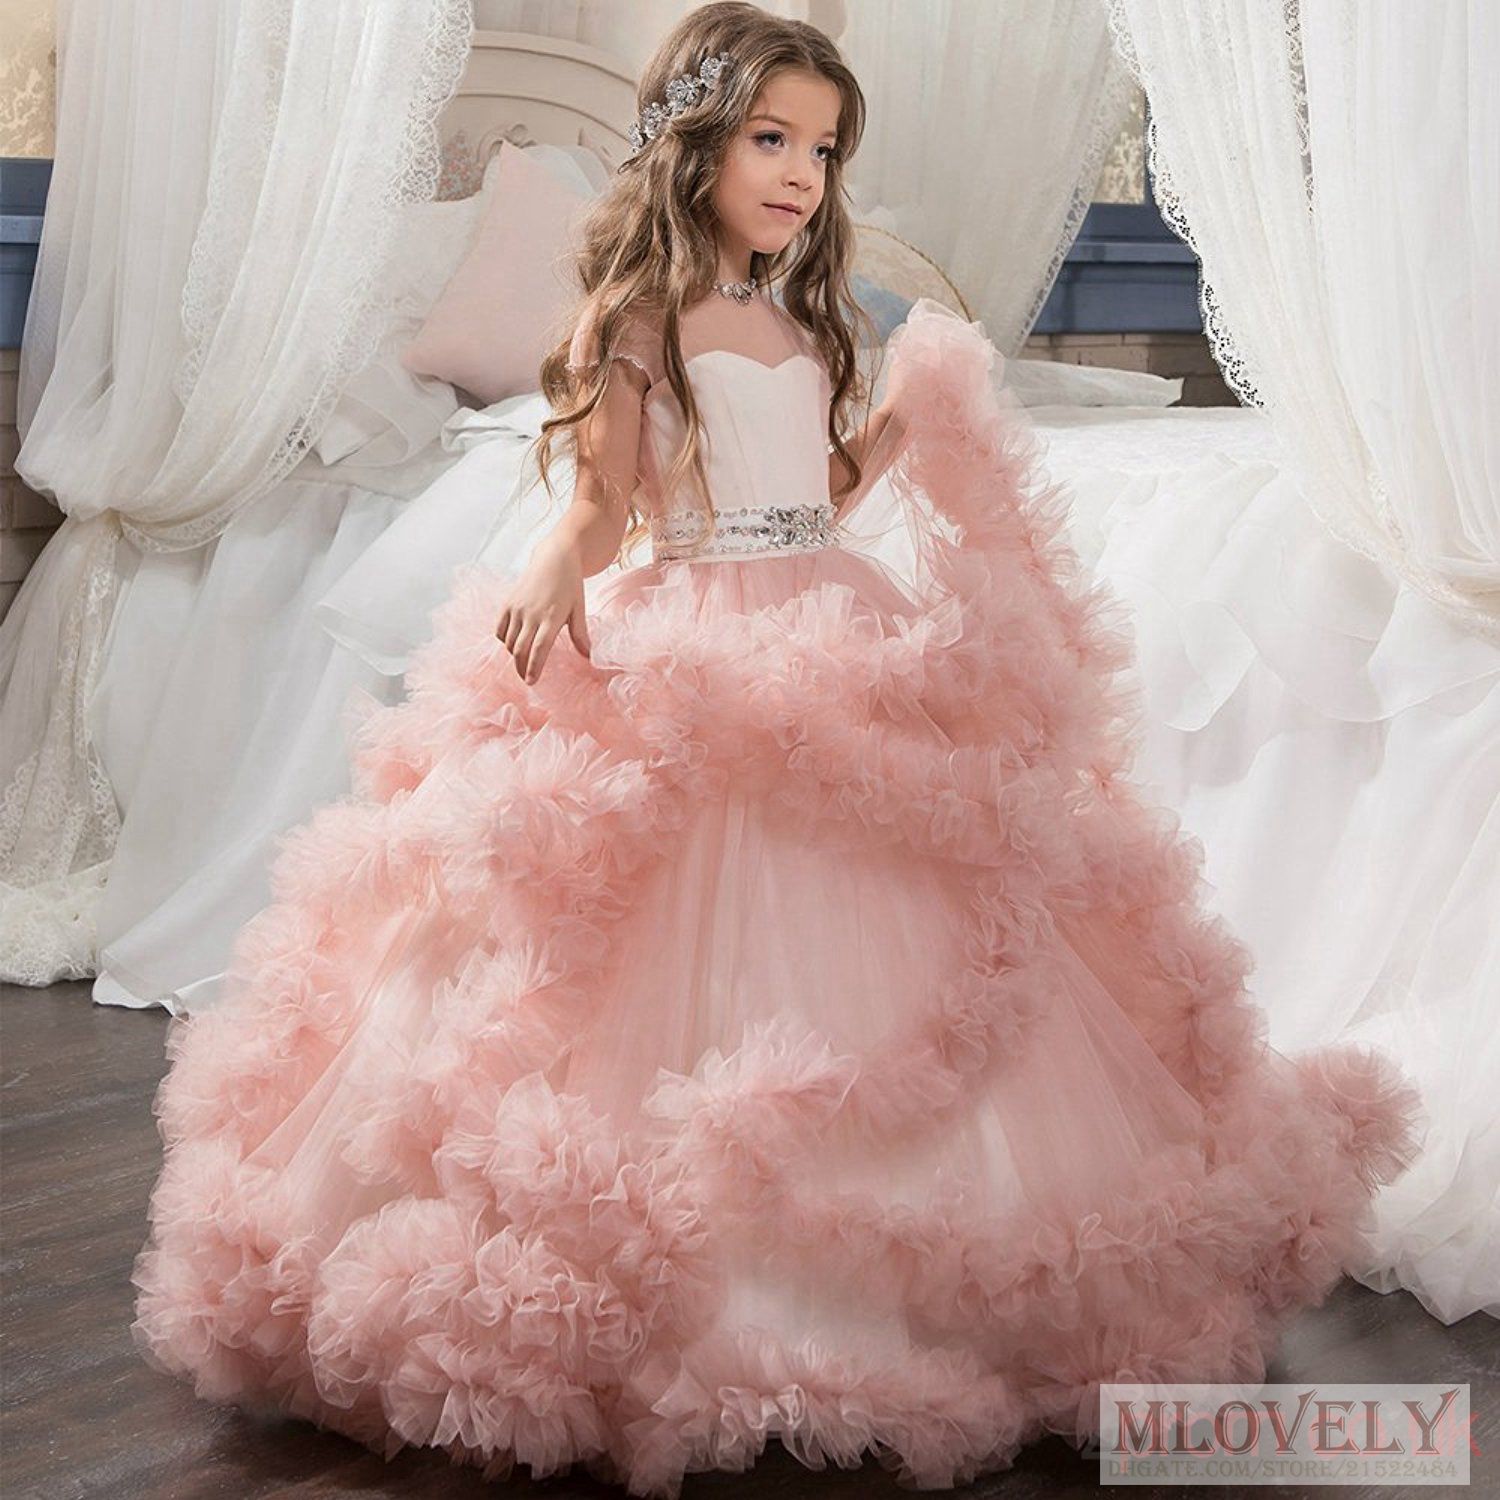 Gown Dresses for Toddlers